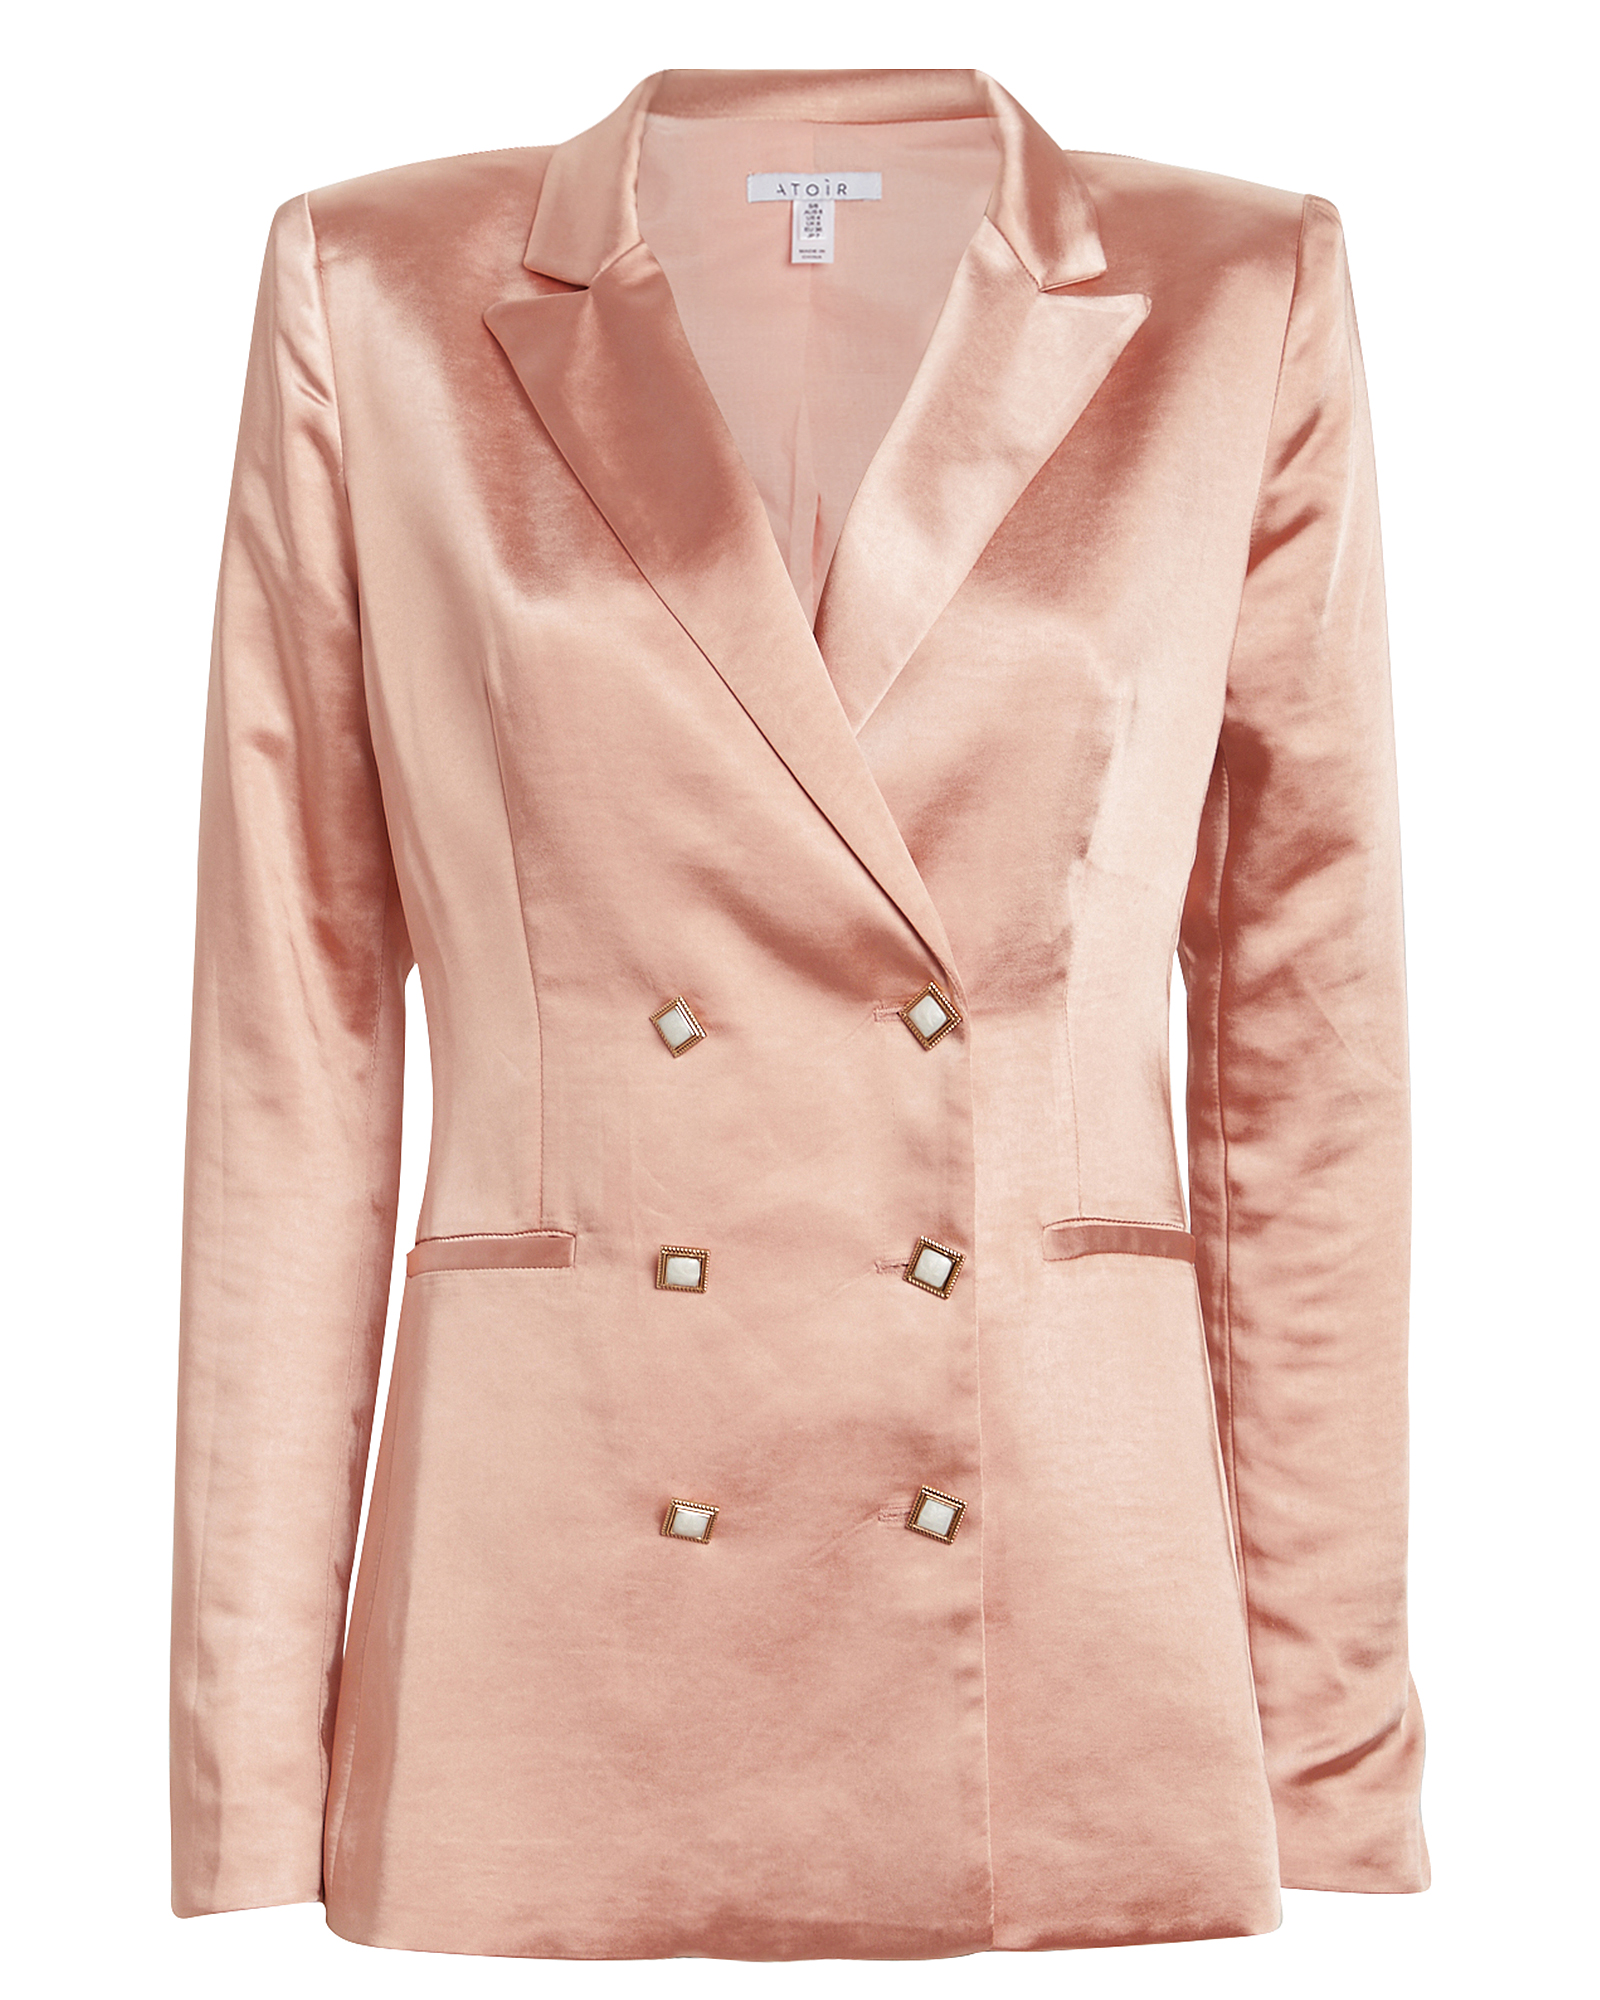 Atoir Don't Call Me Baby Satin Blazer In Muted Sand